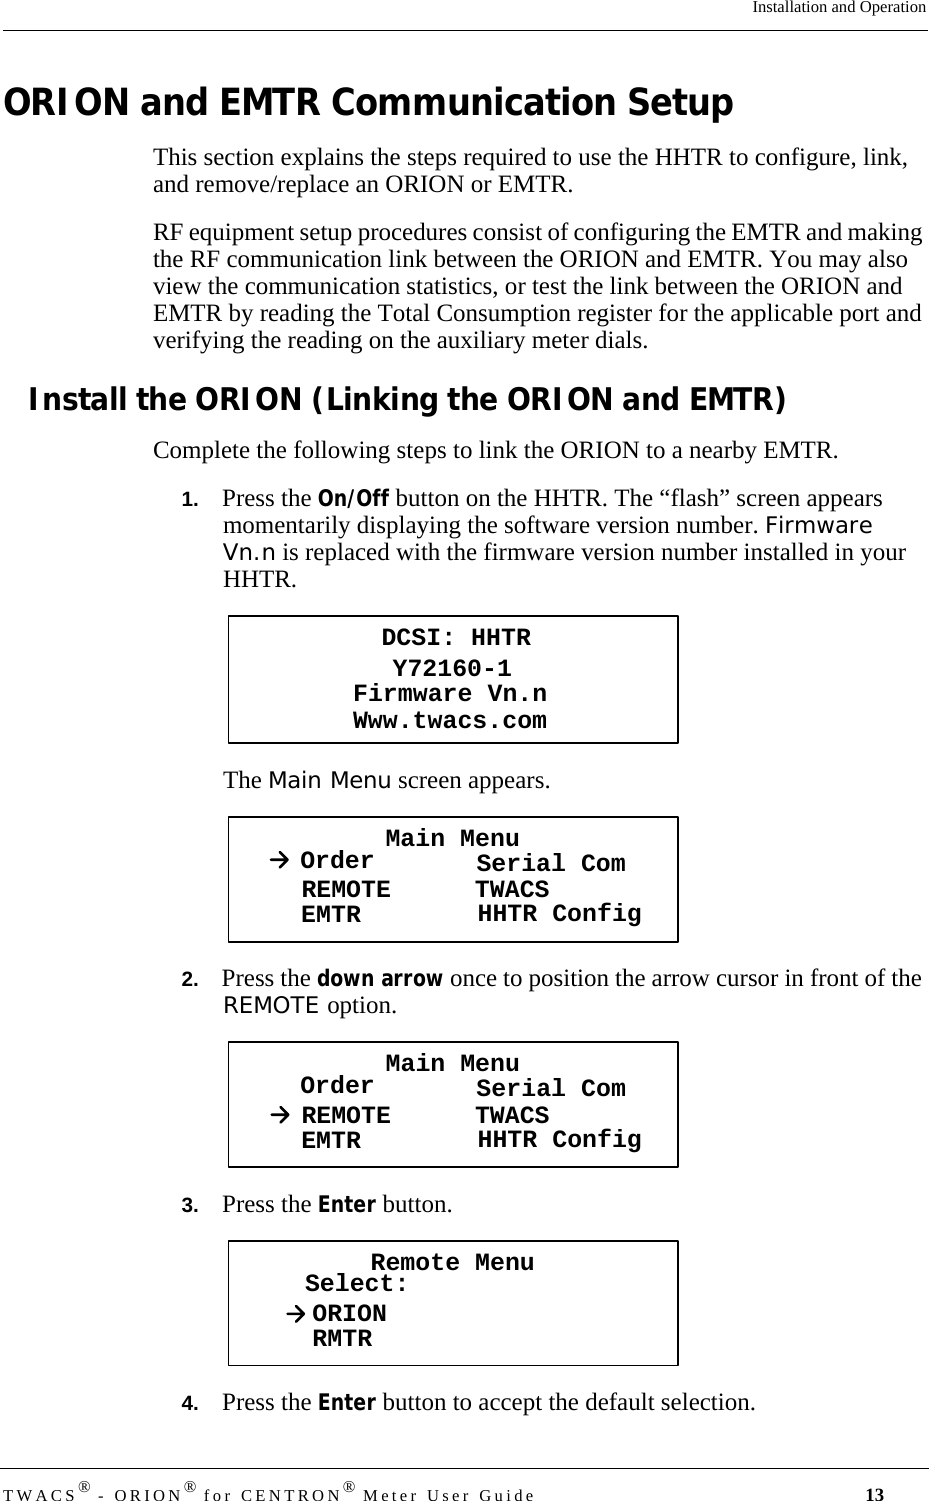 TWACS® - ORION® for CENTRON® Meter User Guide 13Installation and OperationORION and EMTR Communication SetupThis section explains the steps required to use the HHTR to configure, link, and remove/replace an ORION or EMTR. RF equipment setup procedures consist of configuring the EMTR and making the RF communication link between the ORION and EMTR. You may also view the communication statistics, or test the link between the ORION and EMTR by reading the Total Consumption register for the applicable port and verifying the reading on the auxiliary meter dials.Install the ORION (Linking the ORION and EMTR)Complete the following steps to link the ORION to a nearby EMTR.1.   Press the On/Off button on the HHTR. The “flash” screen appears momentarily displaying the software version number. Firmware Vn.n is replaced with the firmware version number installed in your HHTR.The Main Menu screen appears.2.   Press the down arrow once to position the arrow cursor in front of the REMOTE option.3.   Press the Enter button. 4.   Press the Enter button to accept the default selection.DCSI: HHTRY72160-1Www.twacs.comFirmware Vn.nMain MenuOrder Serial ComREMOTEEMTR TWACSHHTR ConfigMain MenuOrder Serial ComREMOTEEMTR TWACSHHTR ConfigRemote MenuSelect:ORIONRMTR